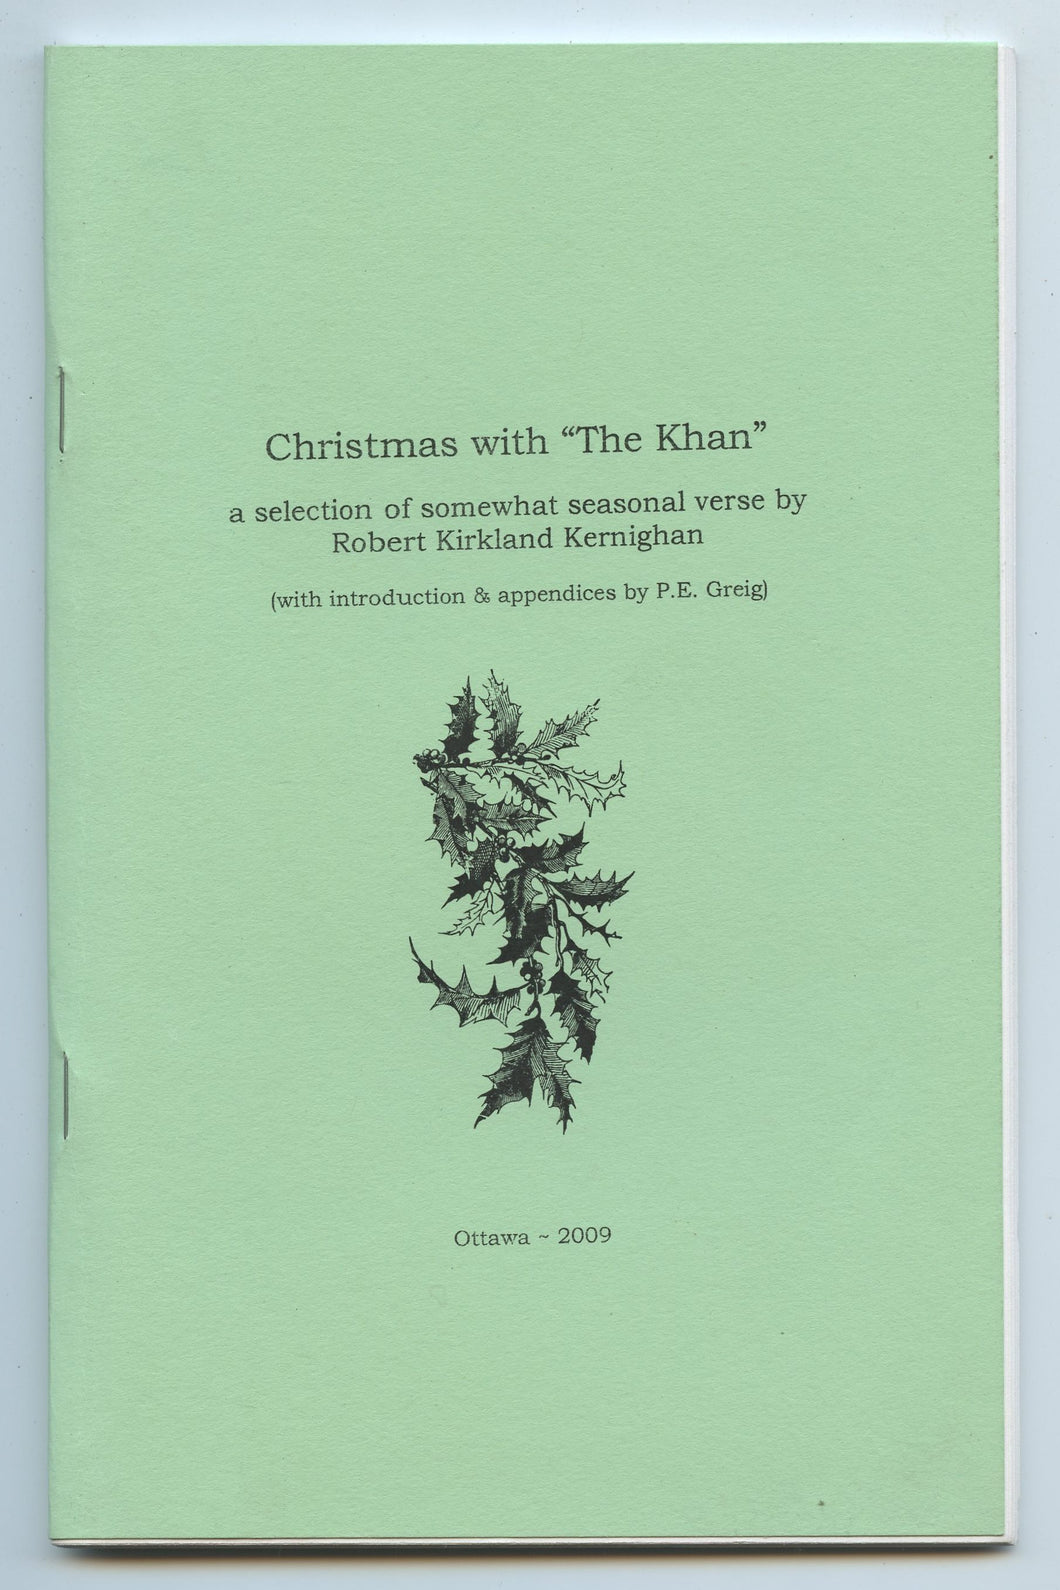 Christmas with "The Khan": a selection of somewhat seasonal verse (with introduction & appendices by P. E. Greig)